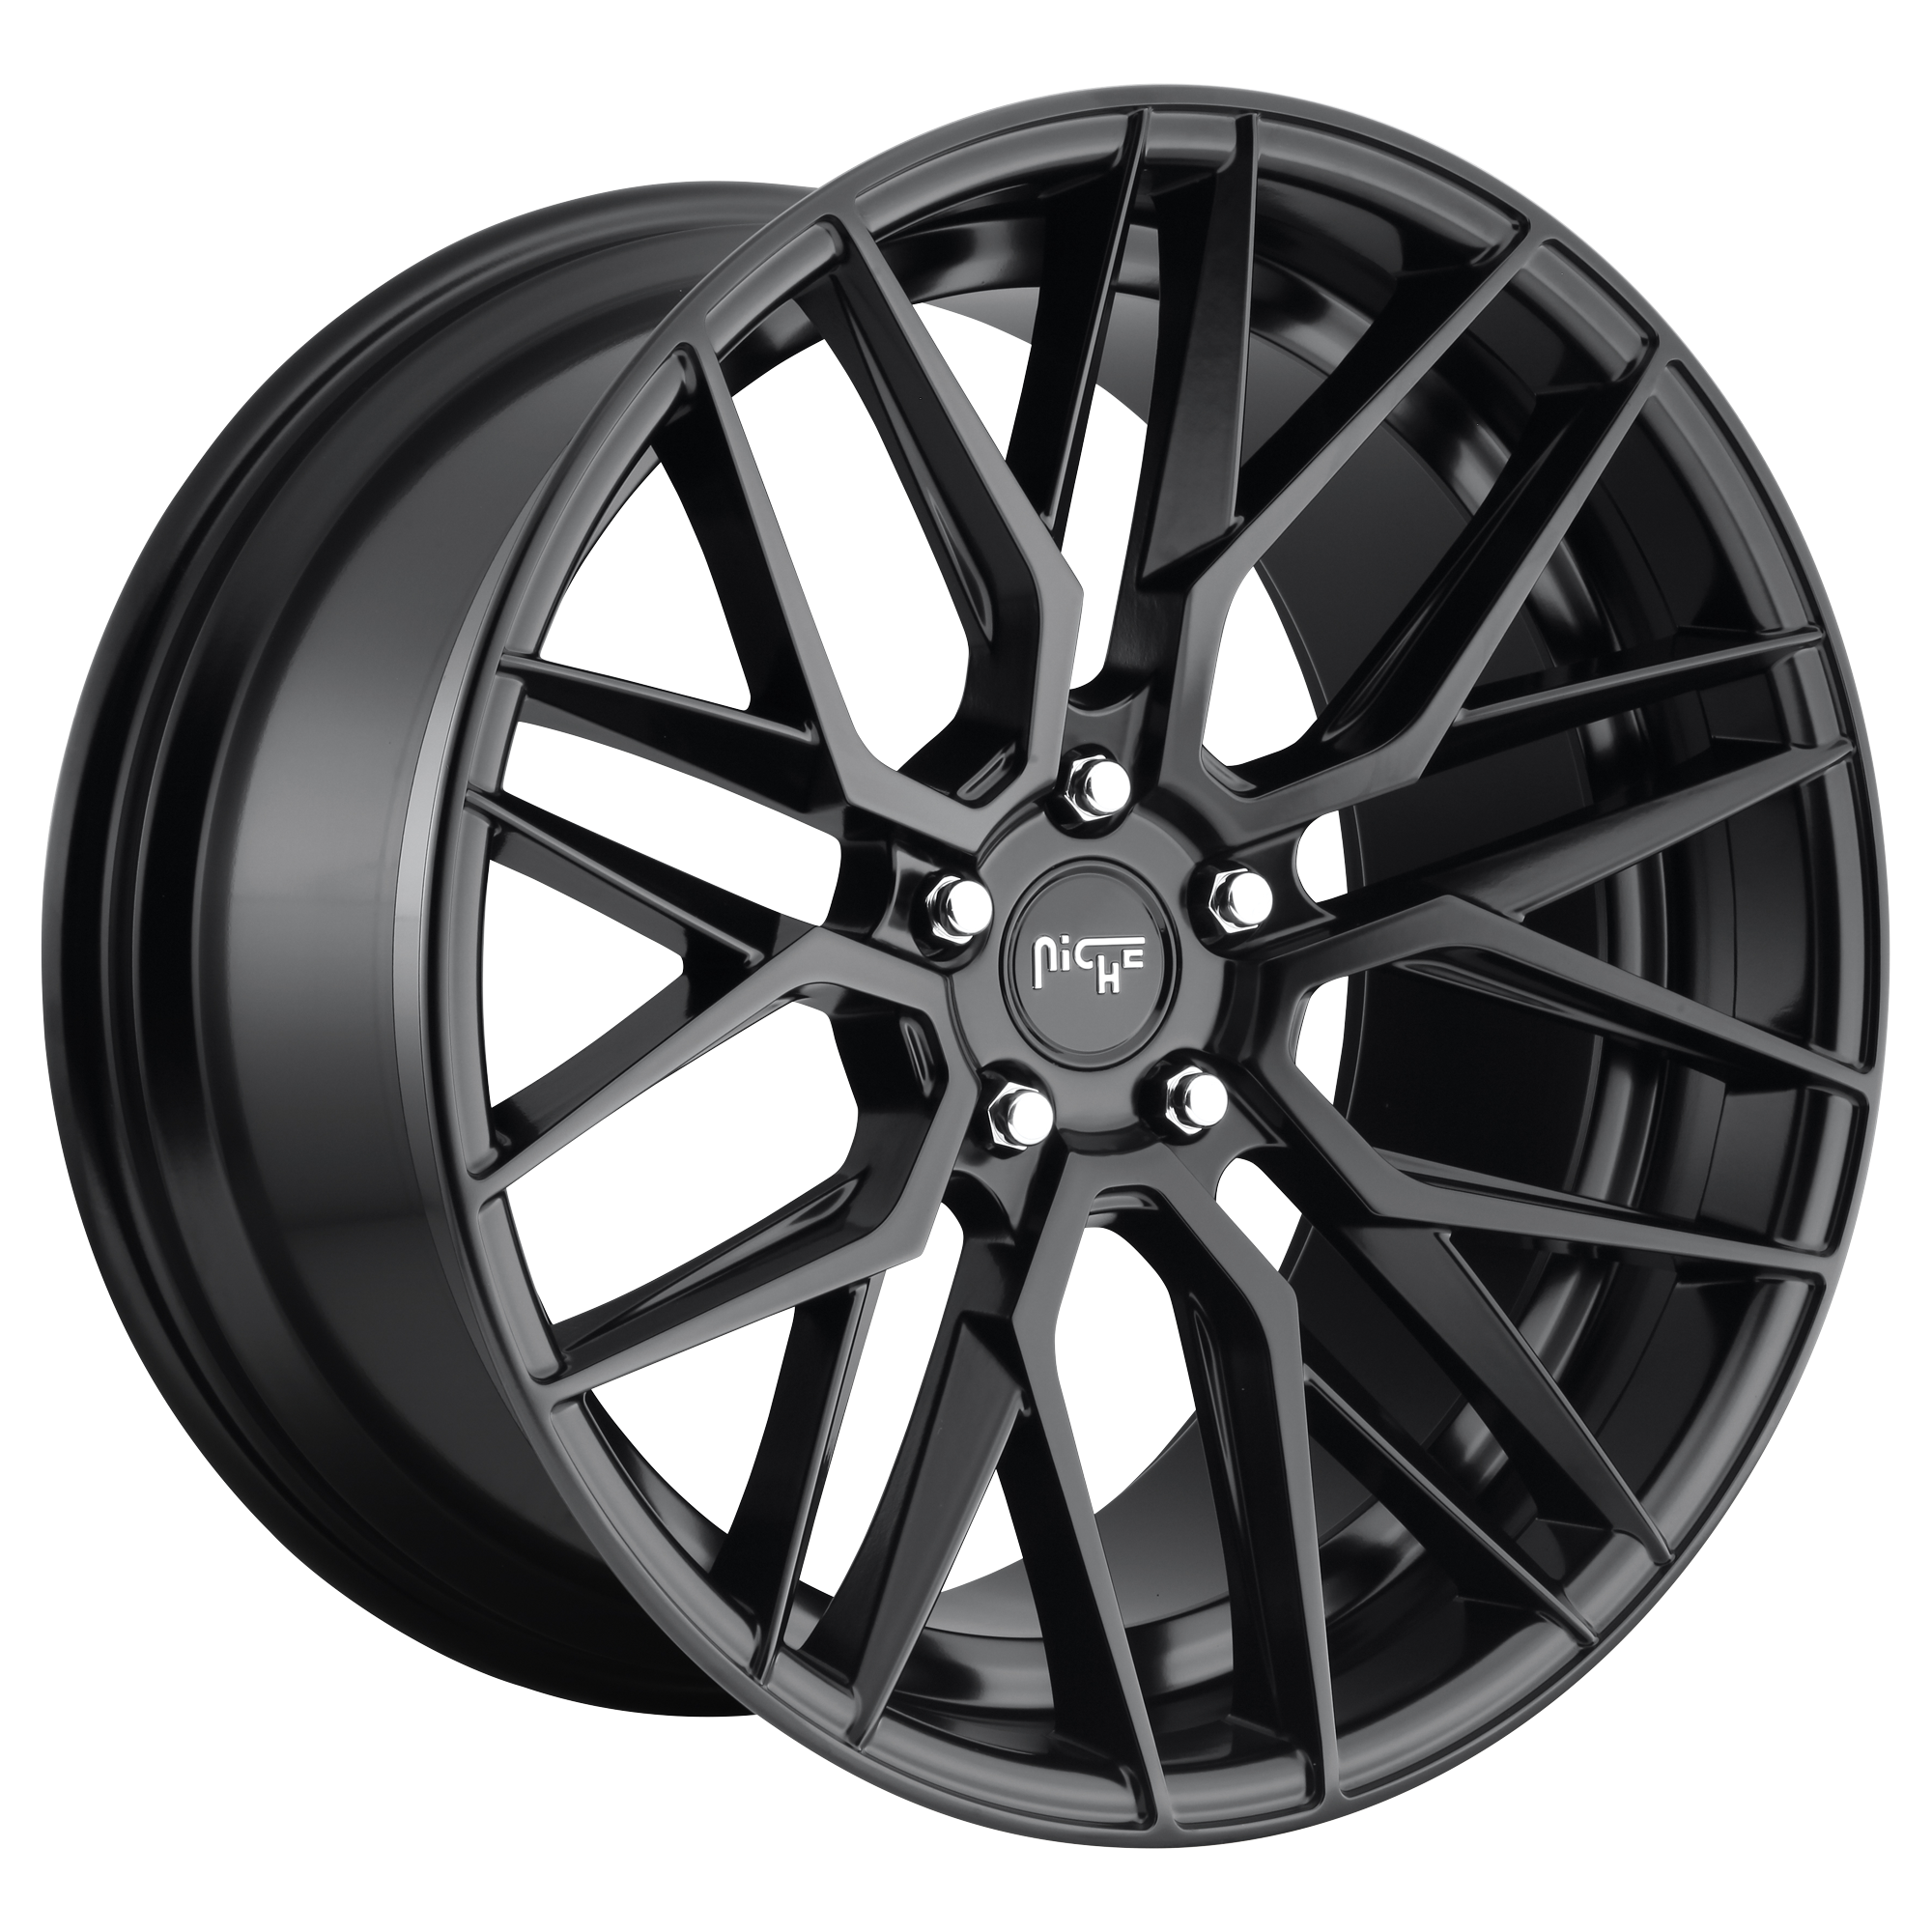 GAMMA 20x10.5 5x120.00 MATTE BLACK (35 mm) - Tires and Engine Performance